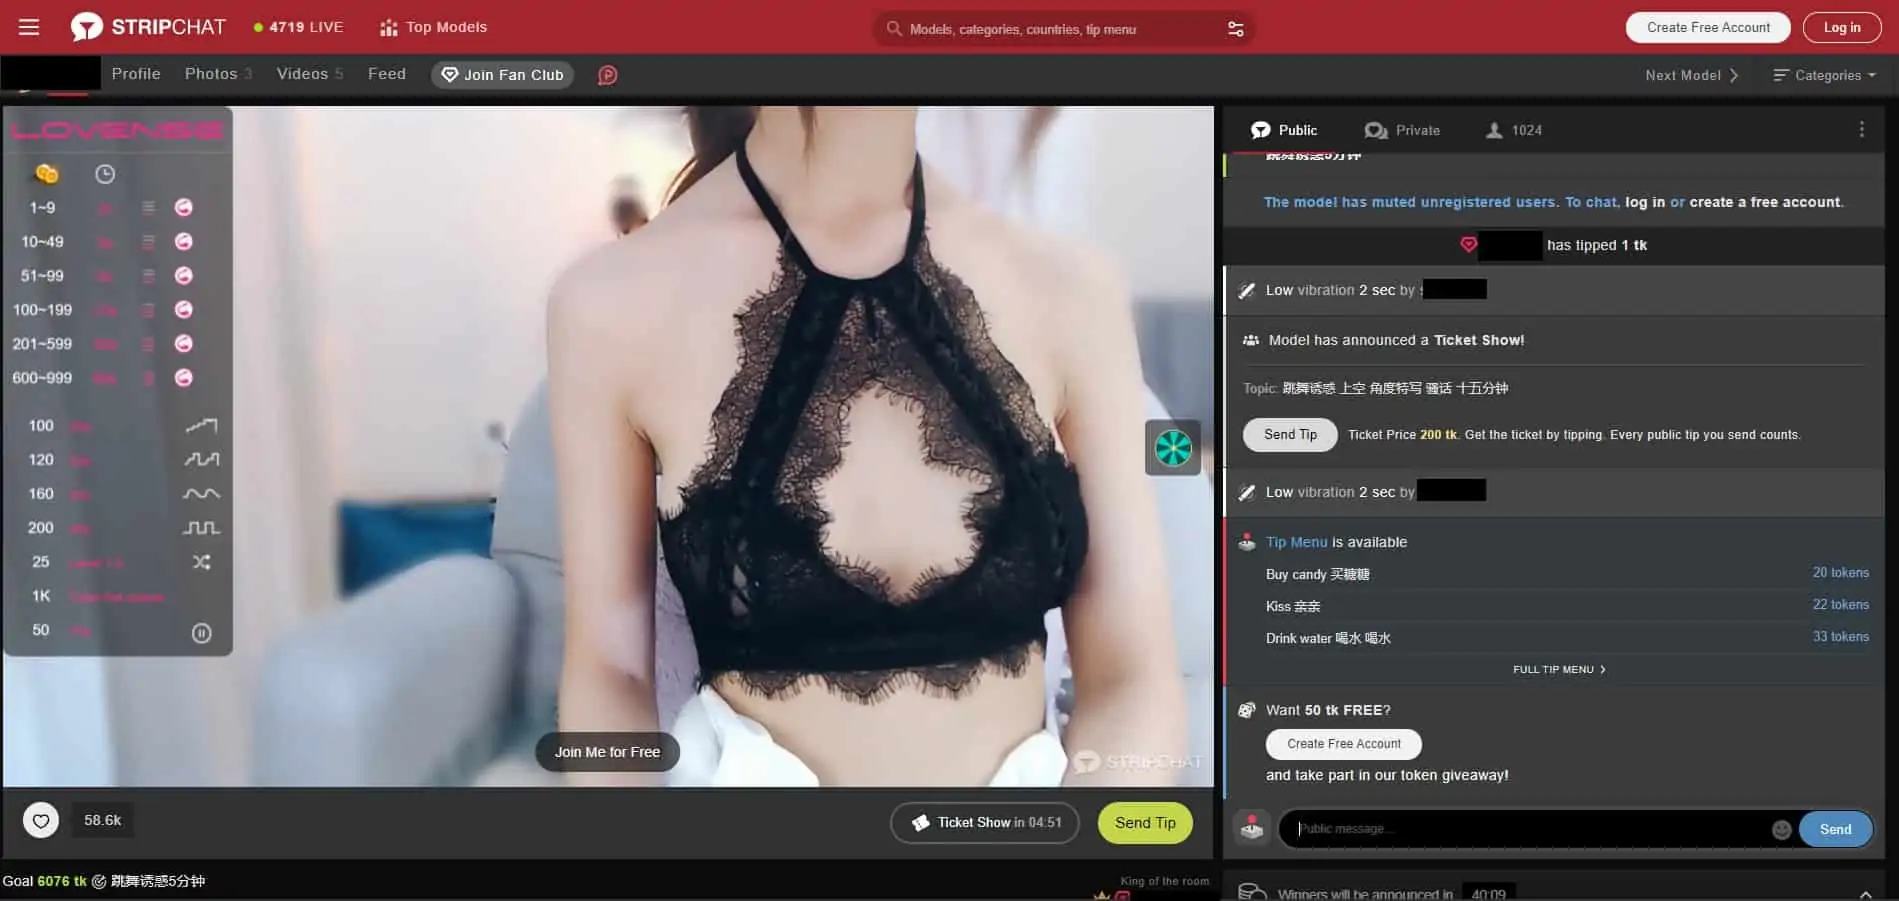 Sex cam site Stripchat exposes user, model info on the web report pic